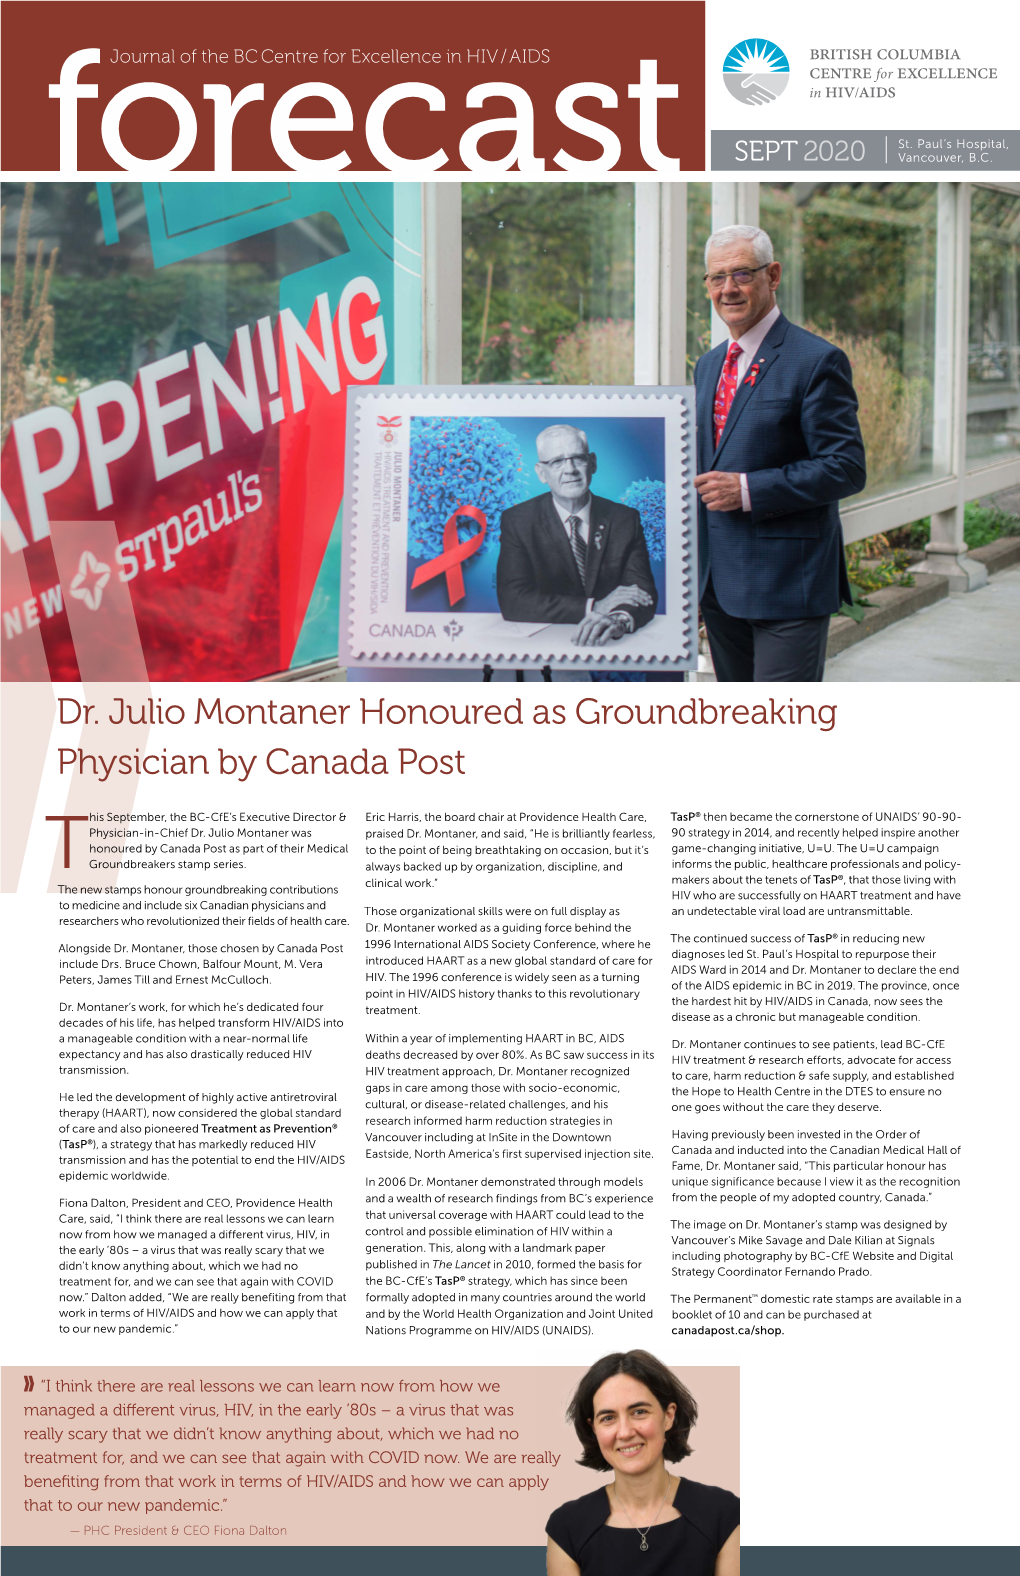 Dr. Julio Montaner Honoured As Groundbreaking Physician by Canada Post